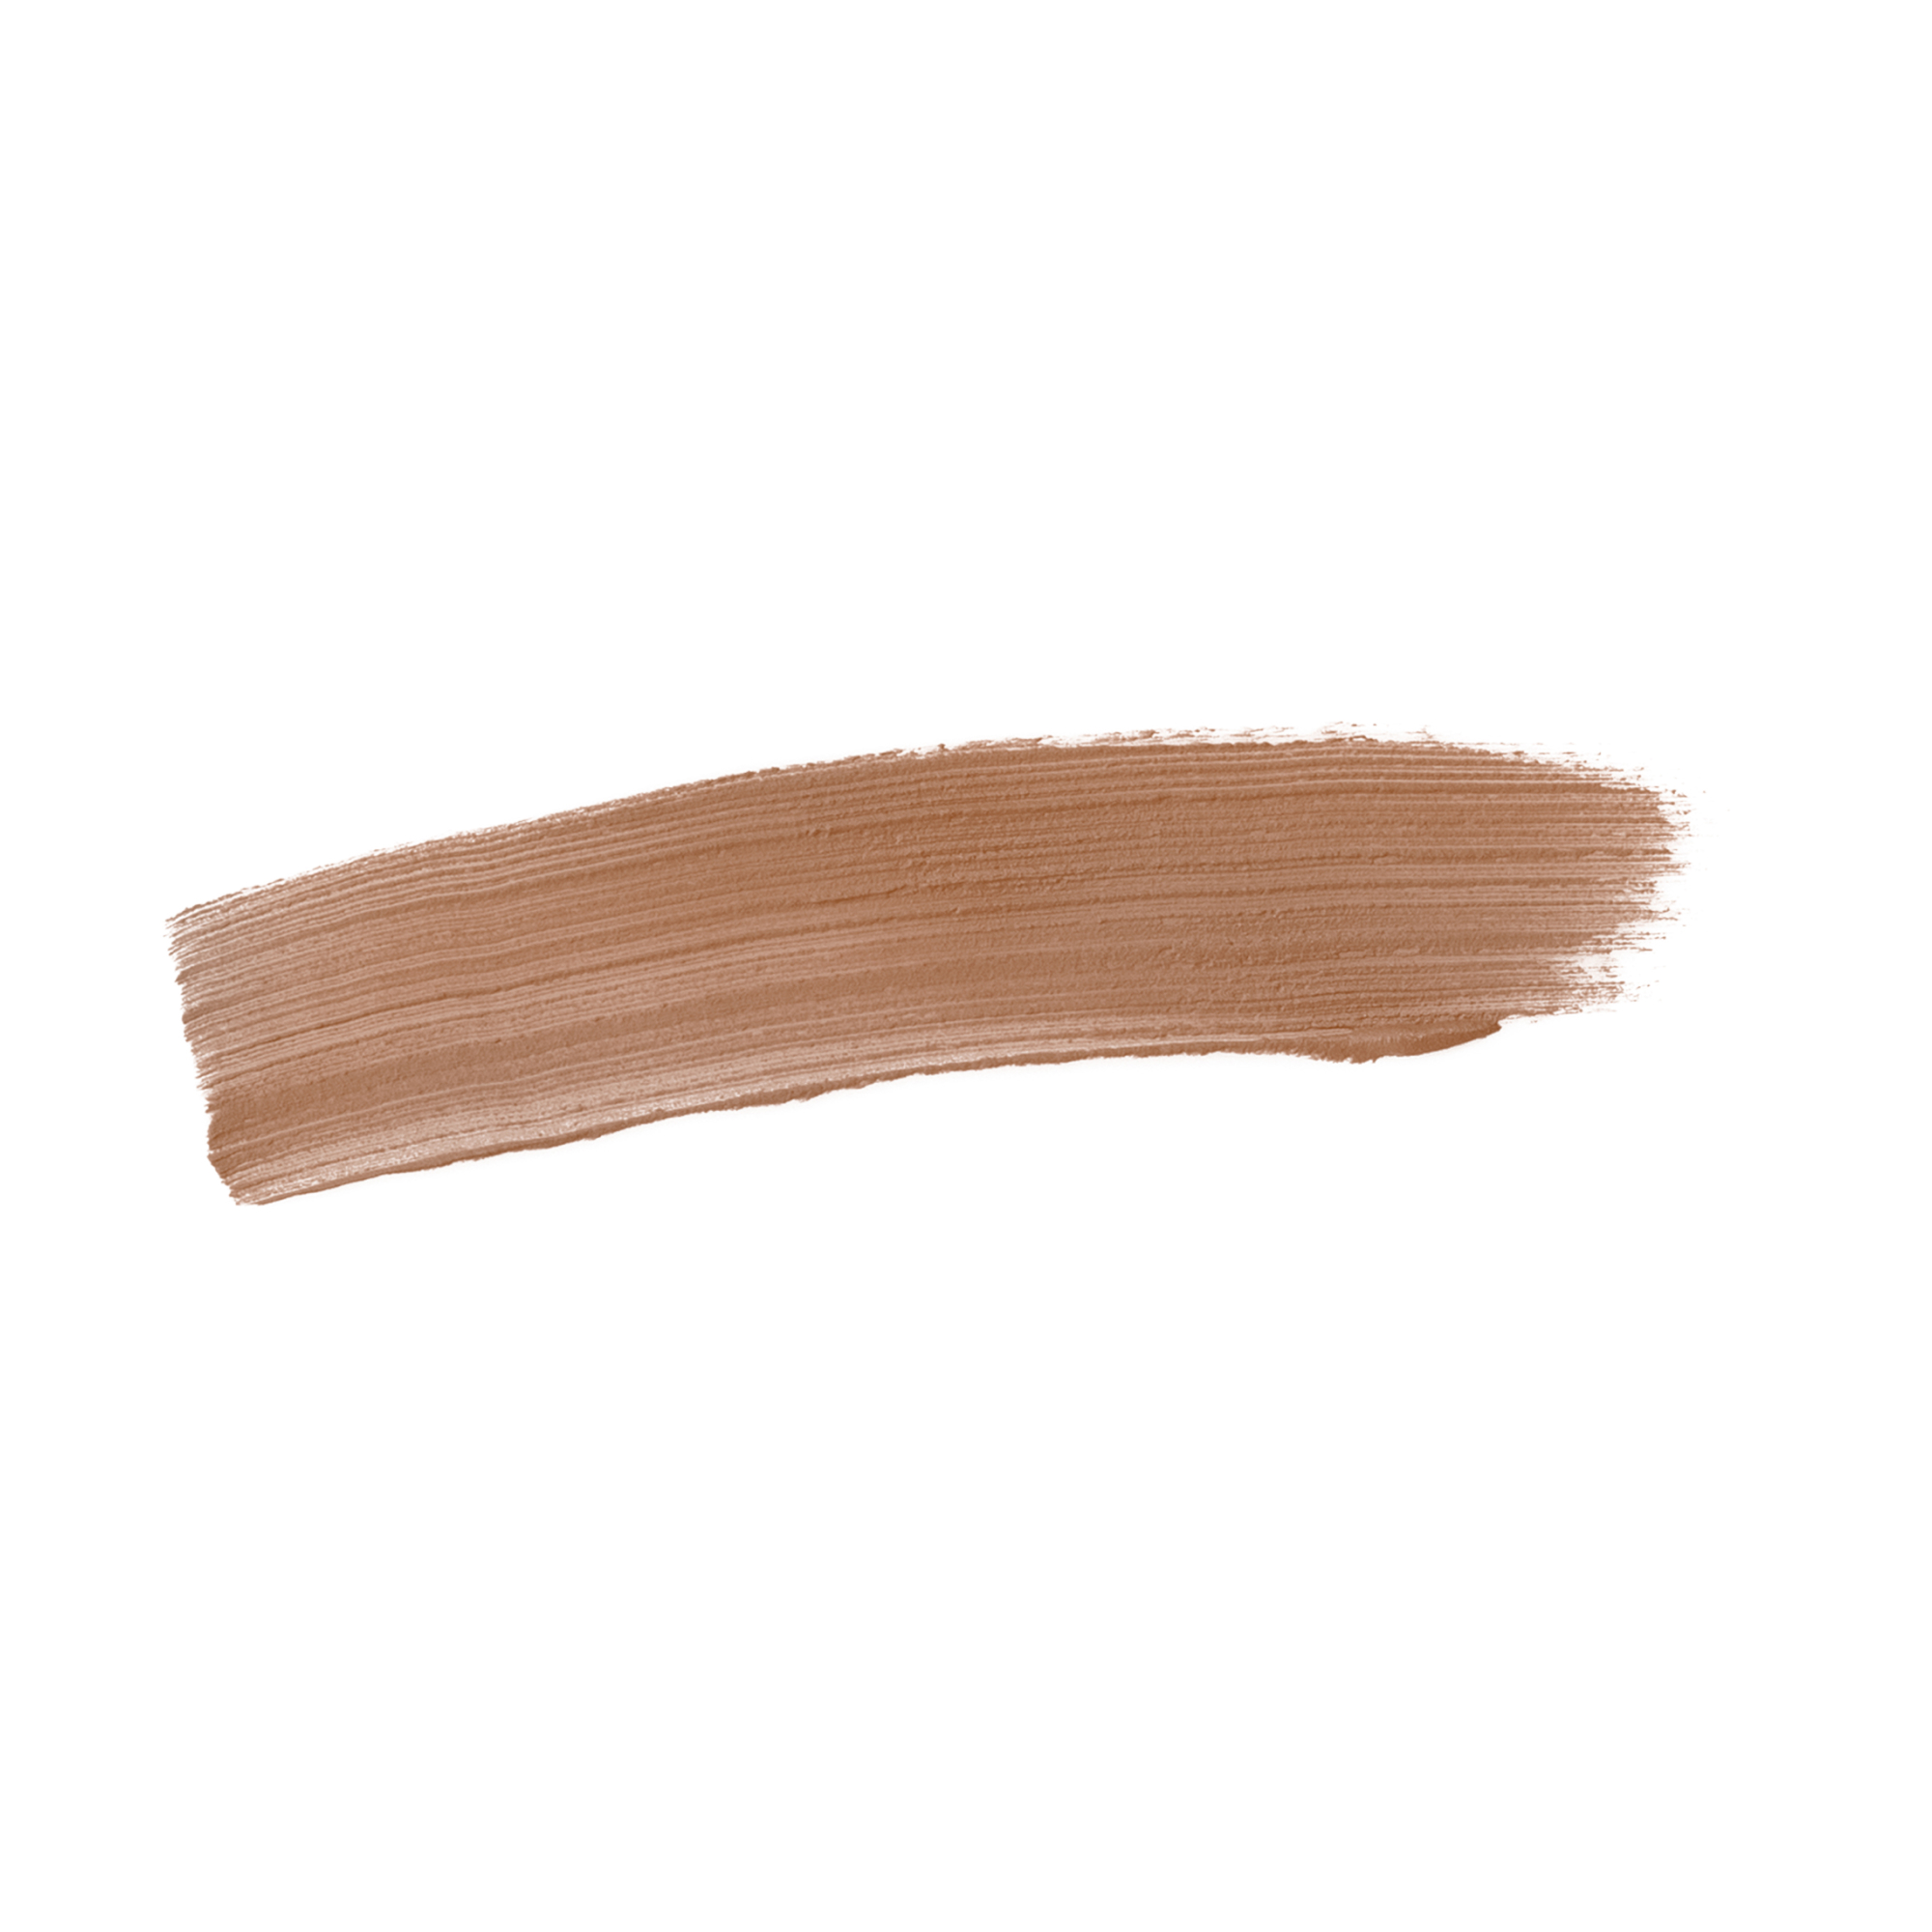 Benefit Cosmetics POWMade Brow Pomade, in Colour: 2 Warm Golden Blonde, Size: One Size